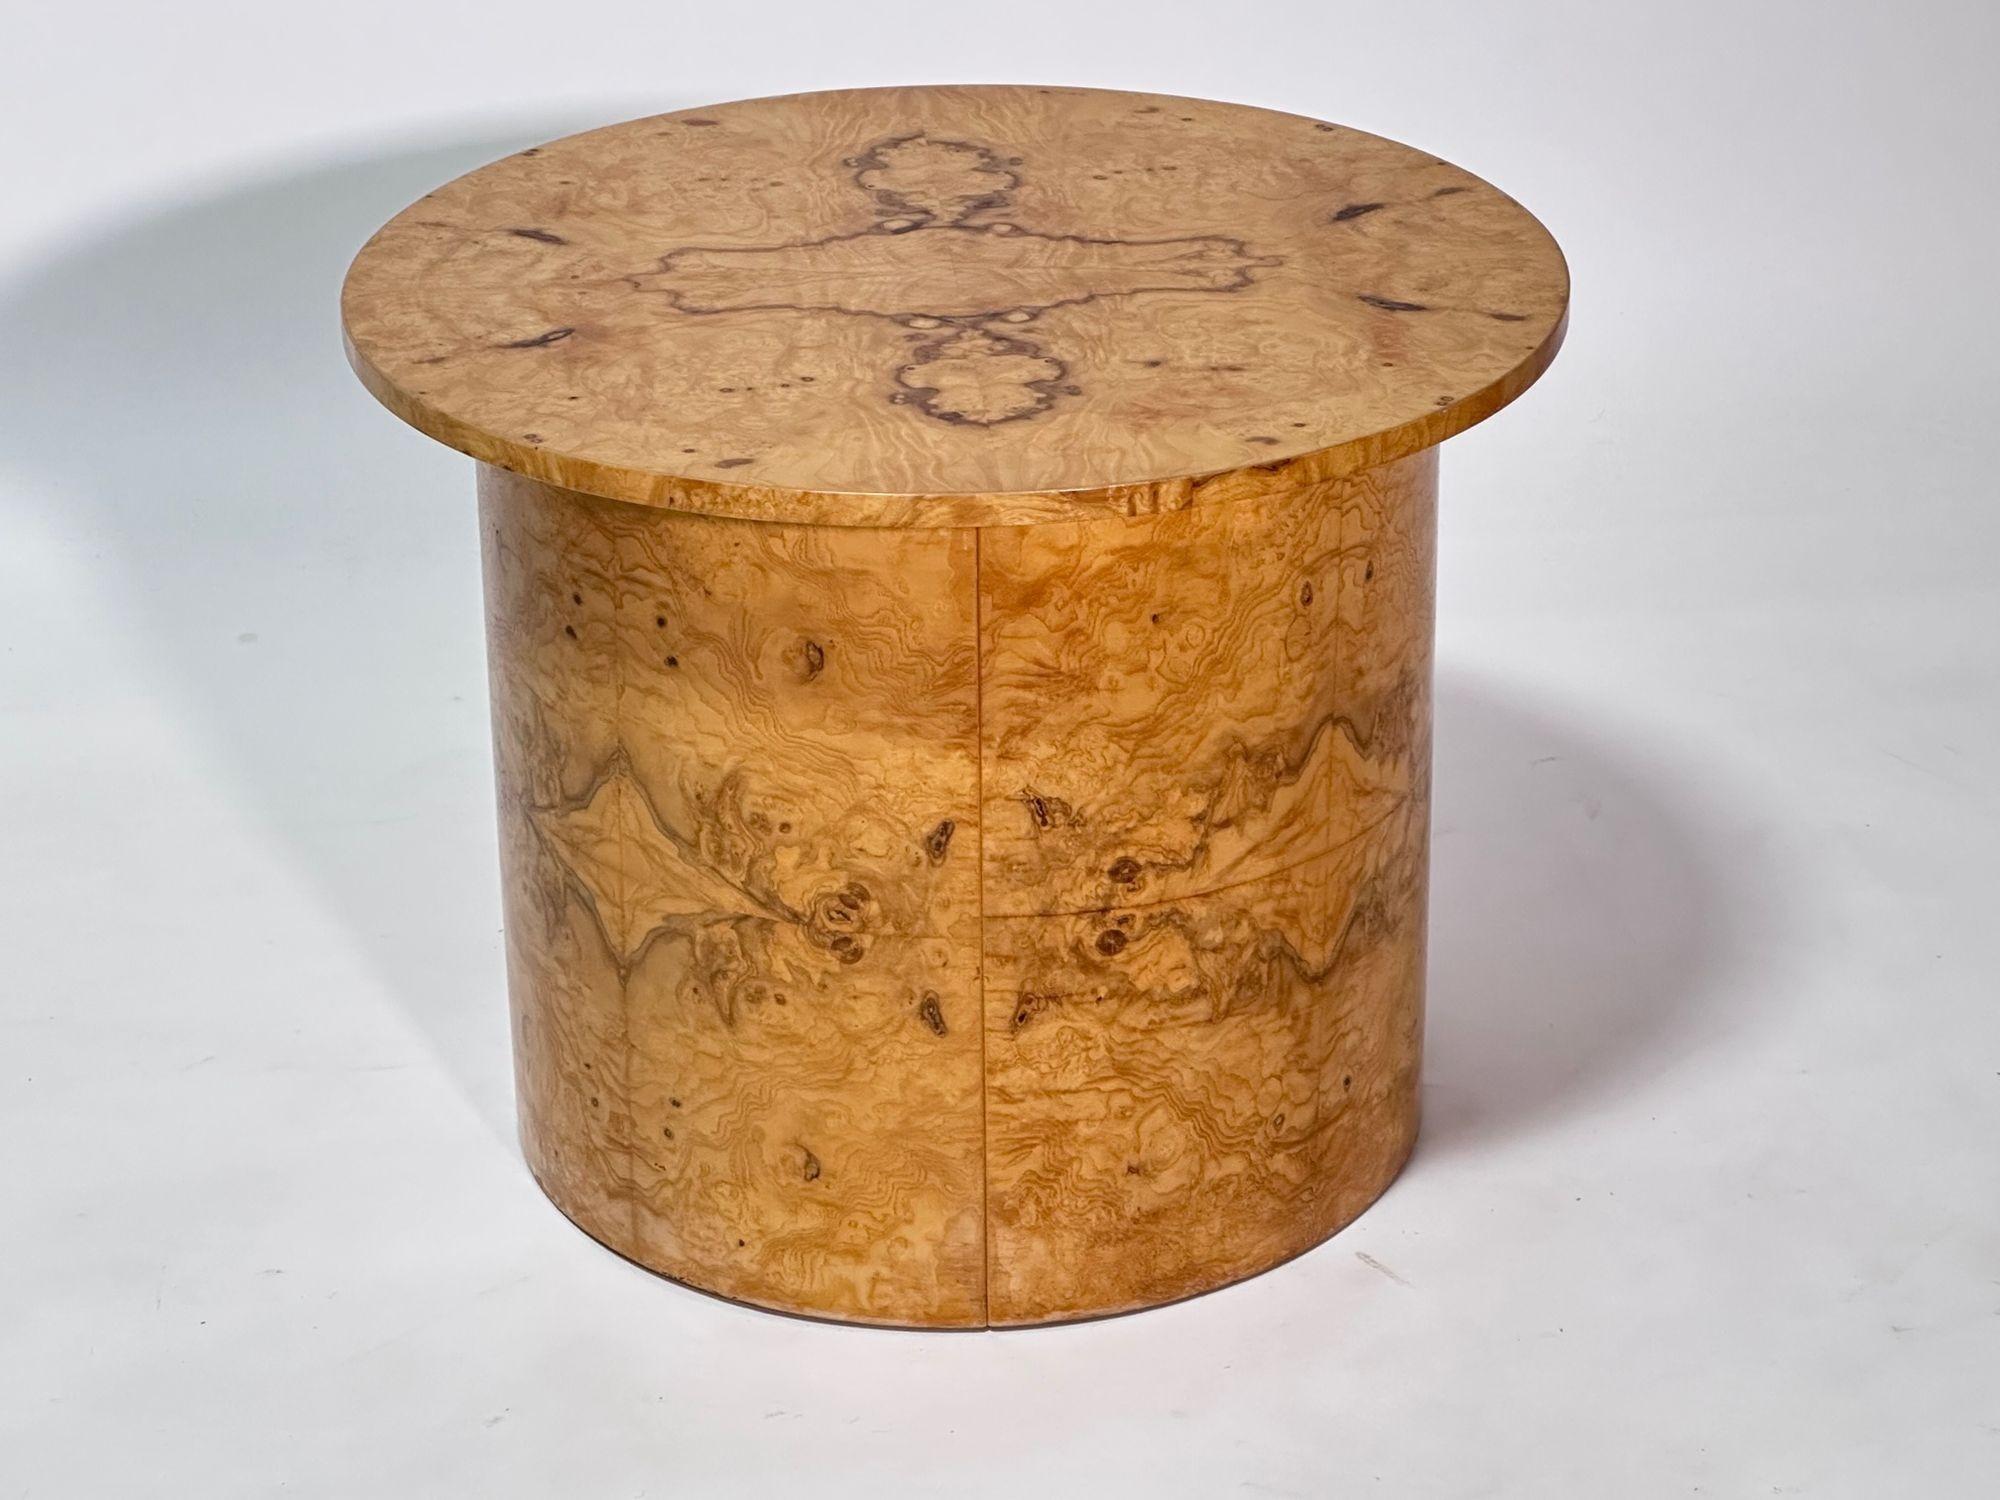 Milo Baughman Italian Burl Olive Wood End/Side Table w/Swivel Top, 1970.  The top of table swivels around.  Completely restored.

